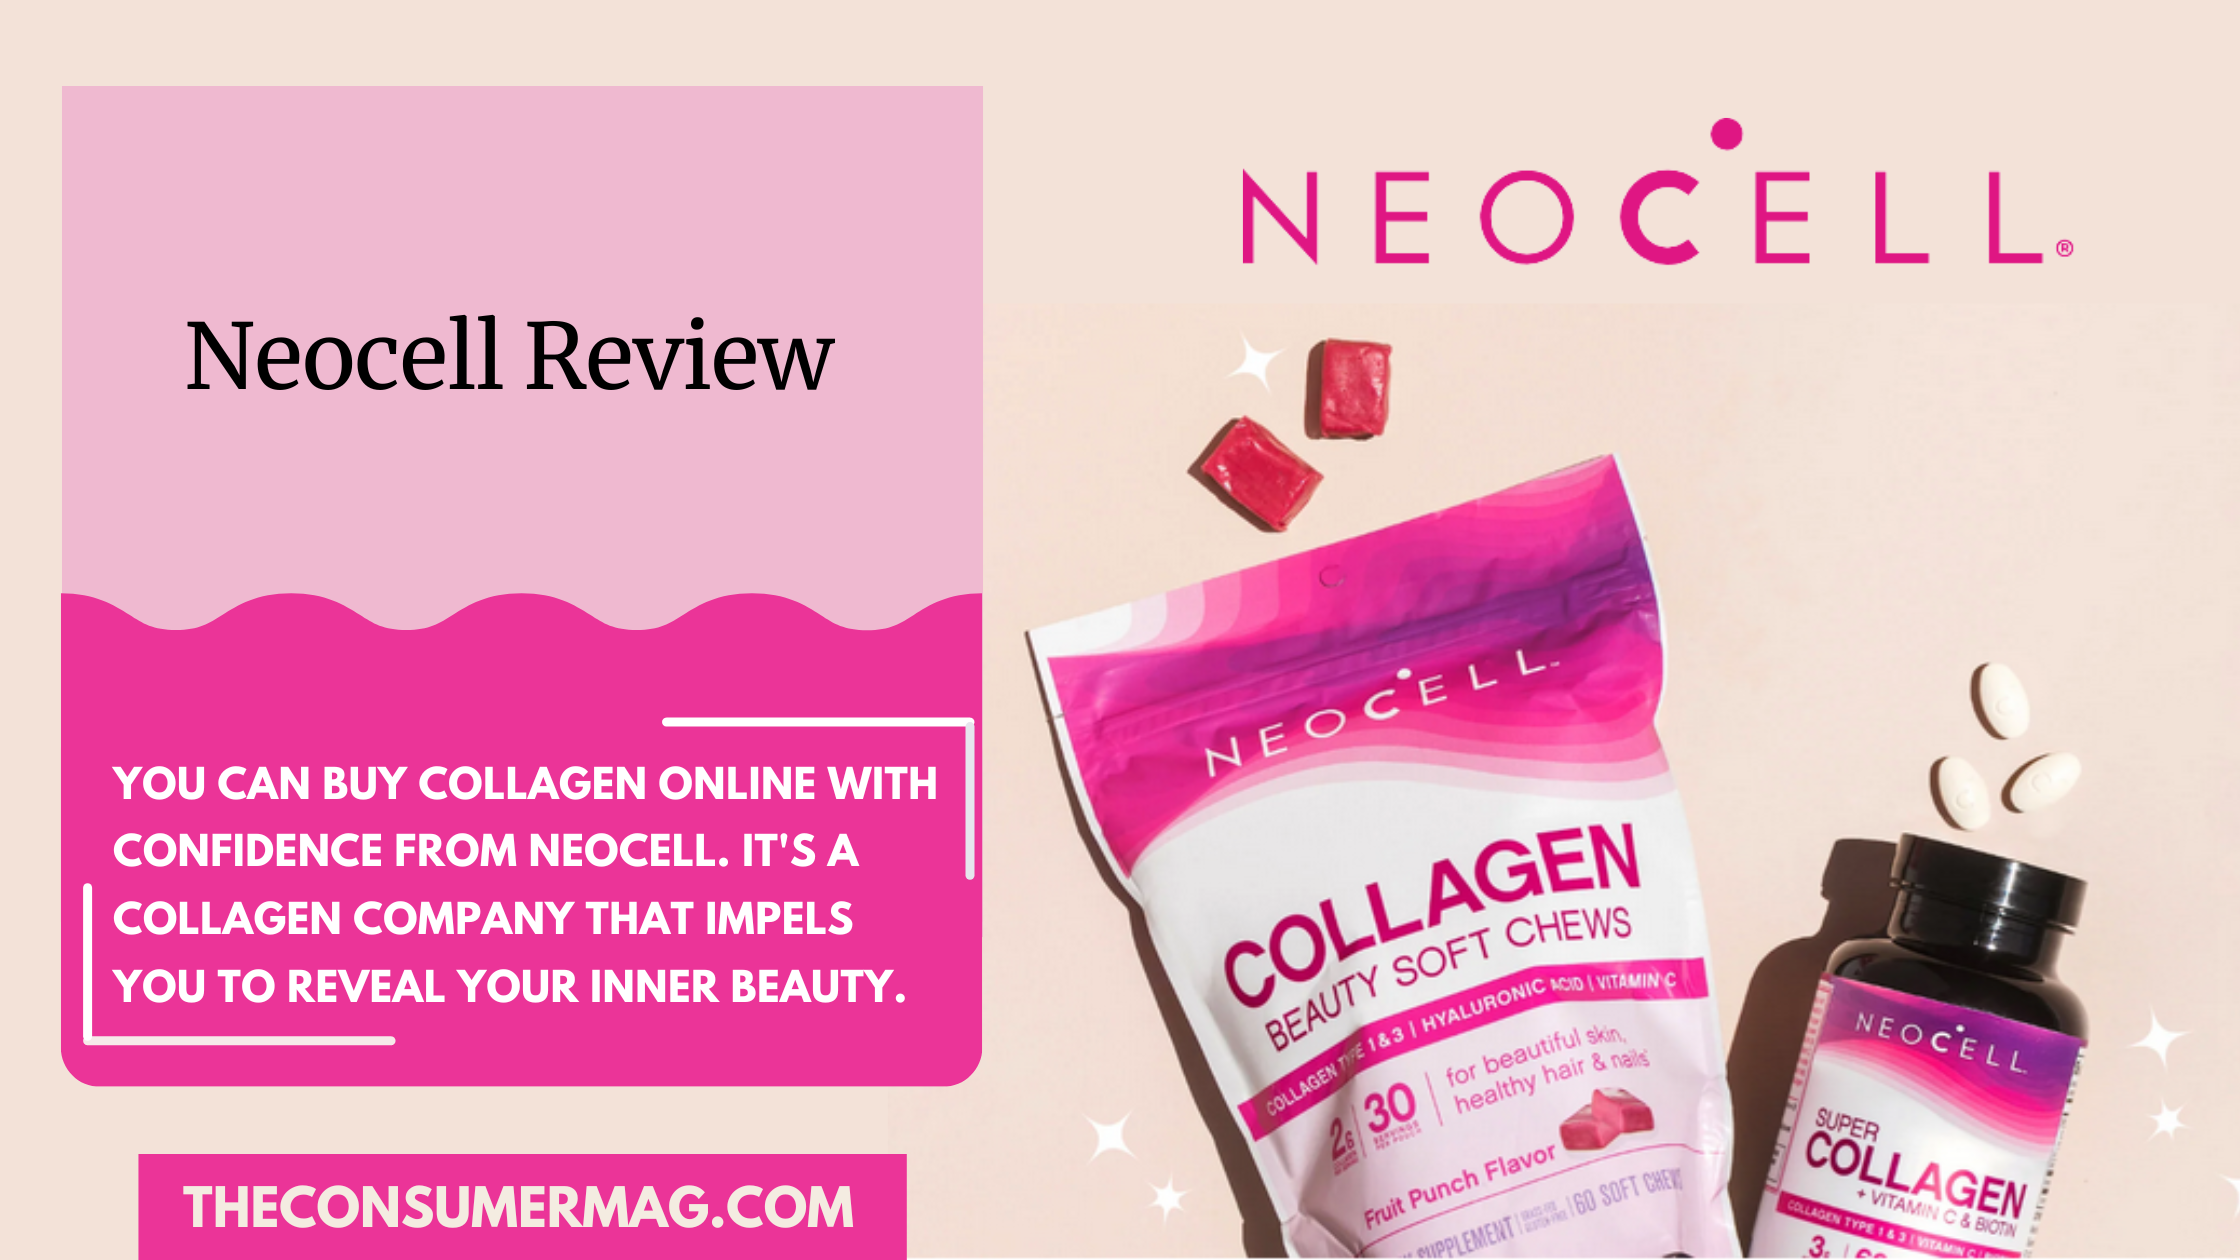 Neocell featured image